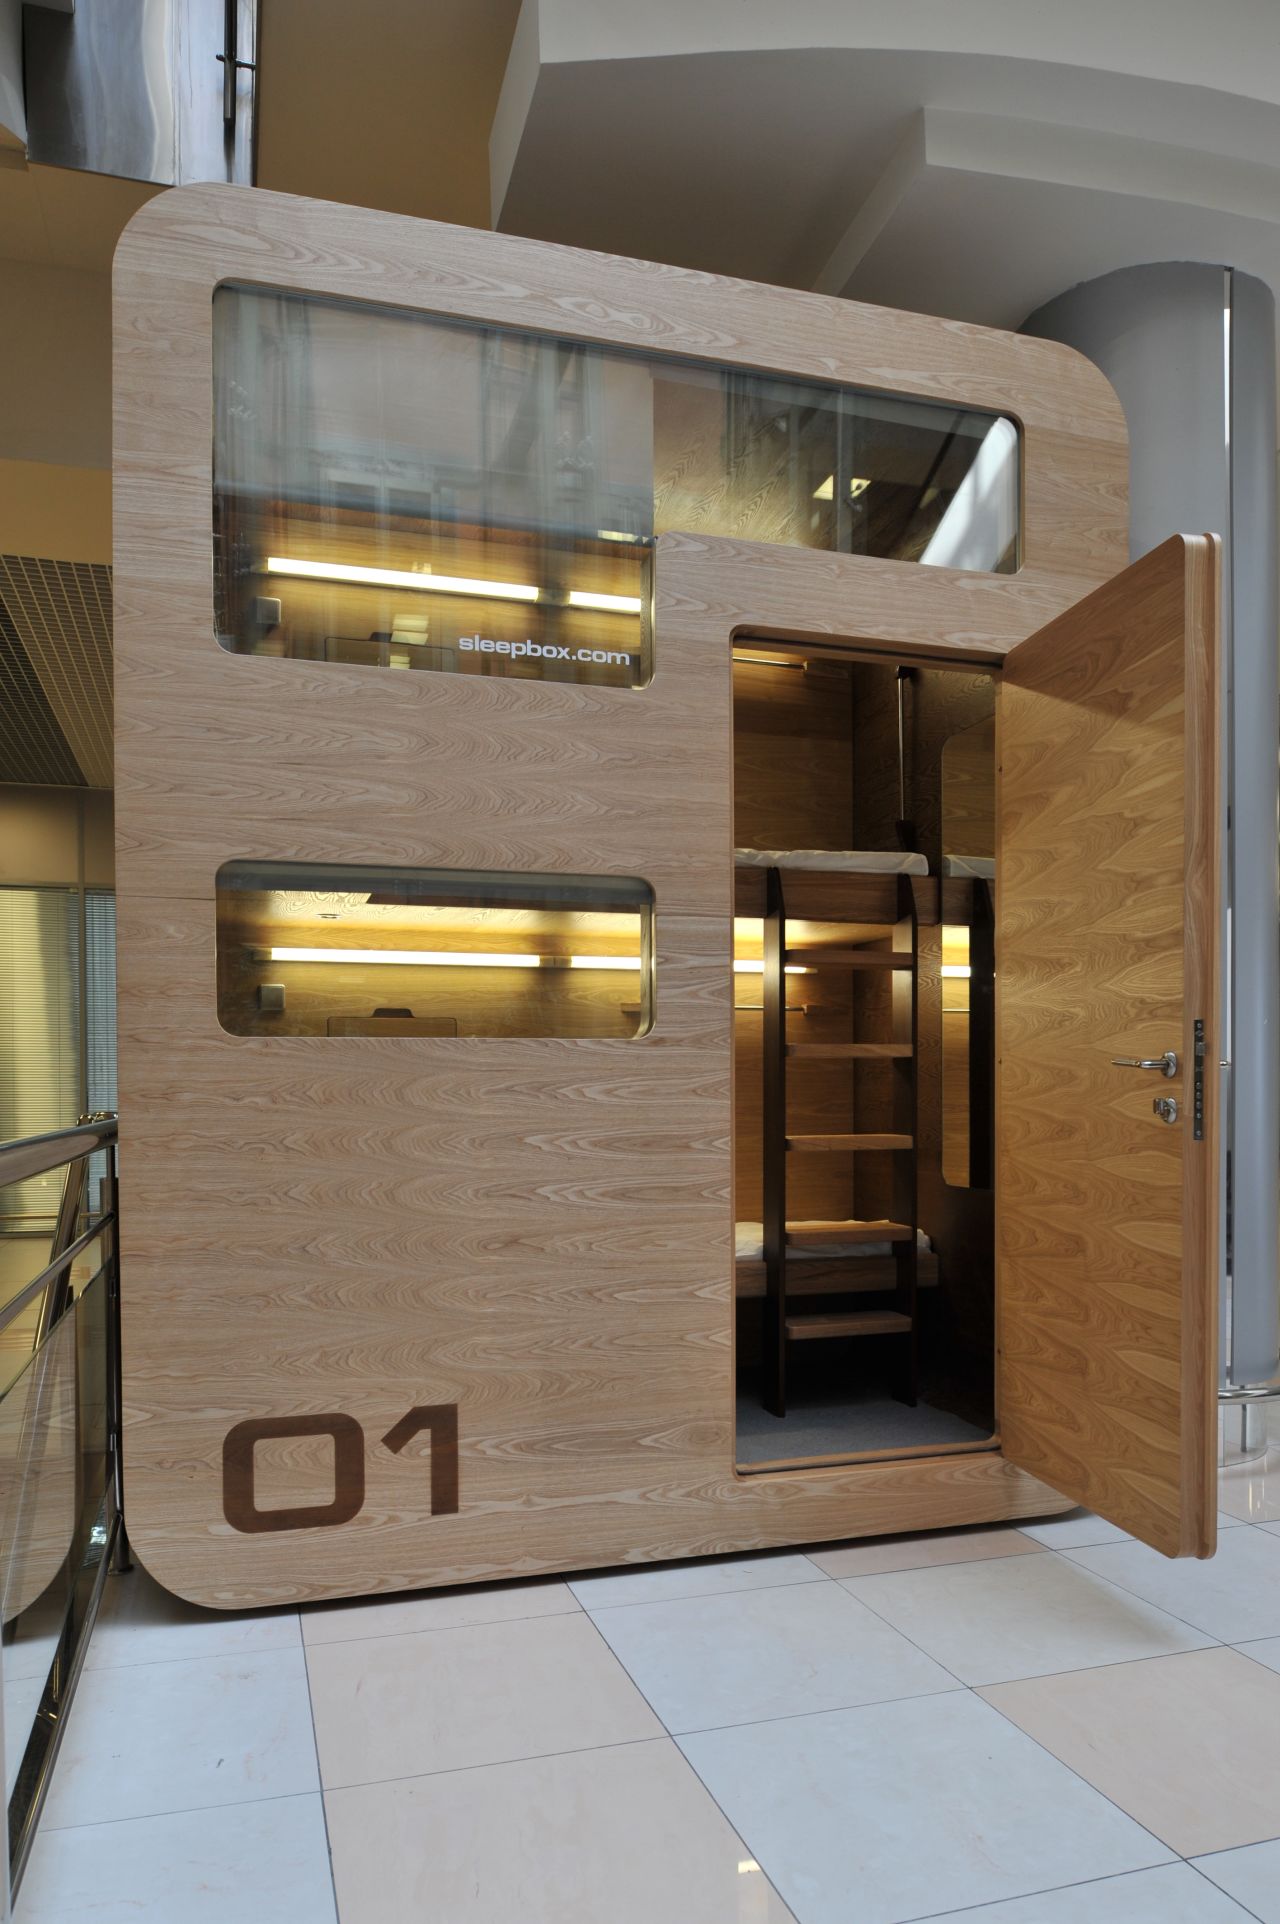 The Russian-designed Sleepbox is currently on display as a demonstration model in Moscow's Sheremetyevo Airport.